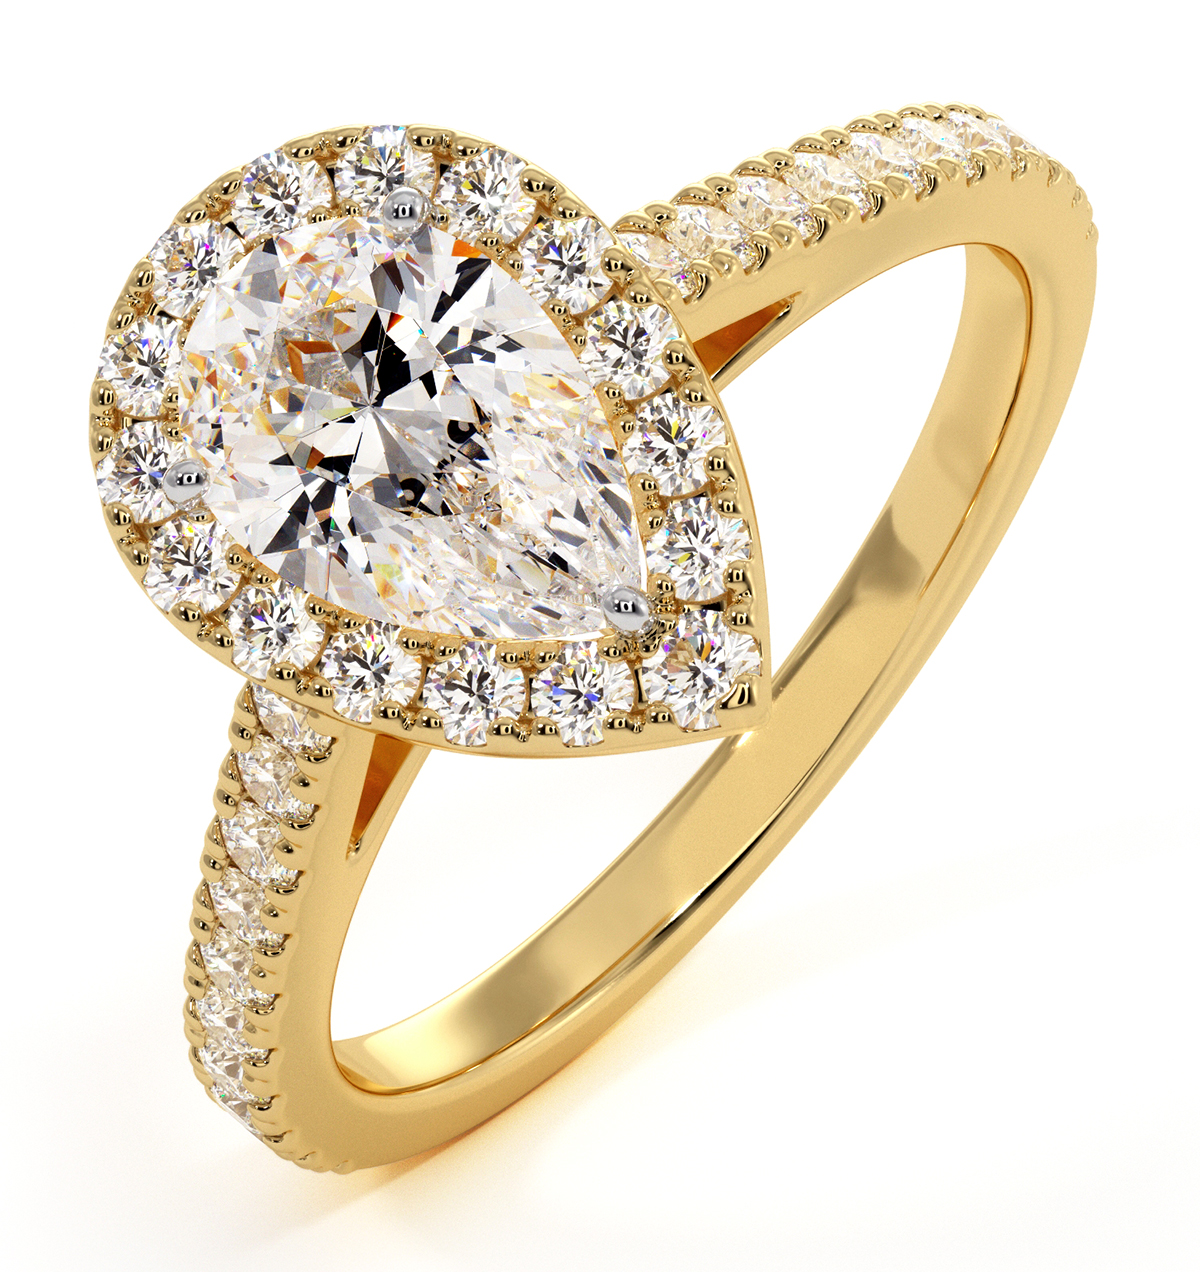 Diana GIA Diamond Pear Halo Engagement Ring in 18K Gold 1.35ct G/SI1 - image 1